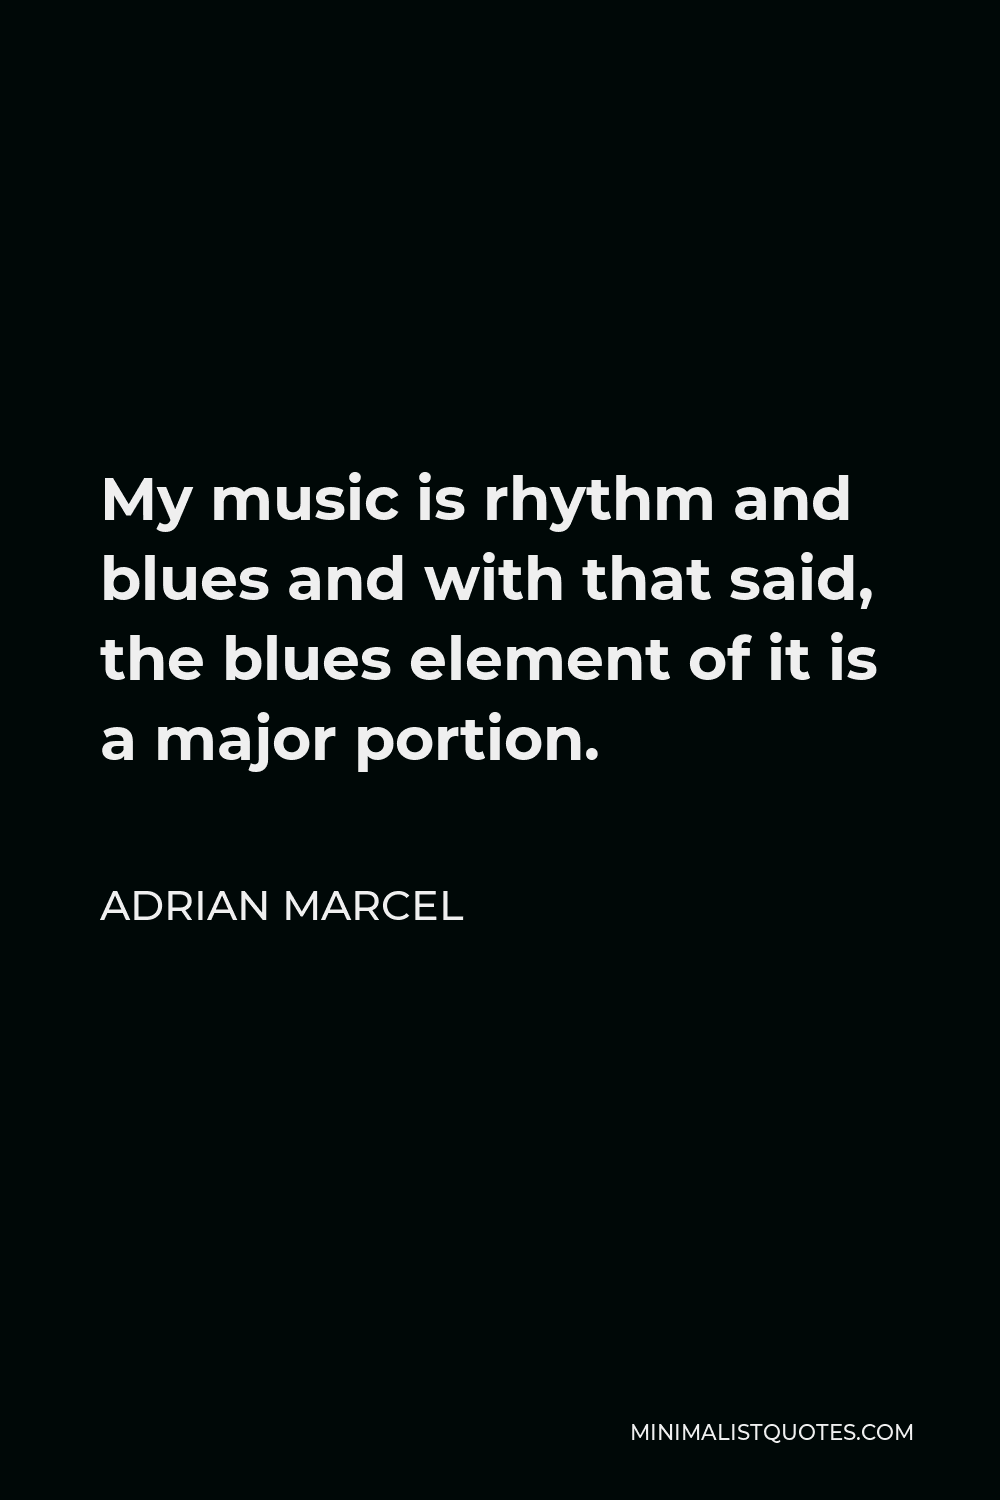 Adrian Marcel Quote - My music is rhythm and blues and with that said, the blues element of it is a major portion.